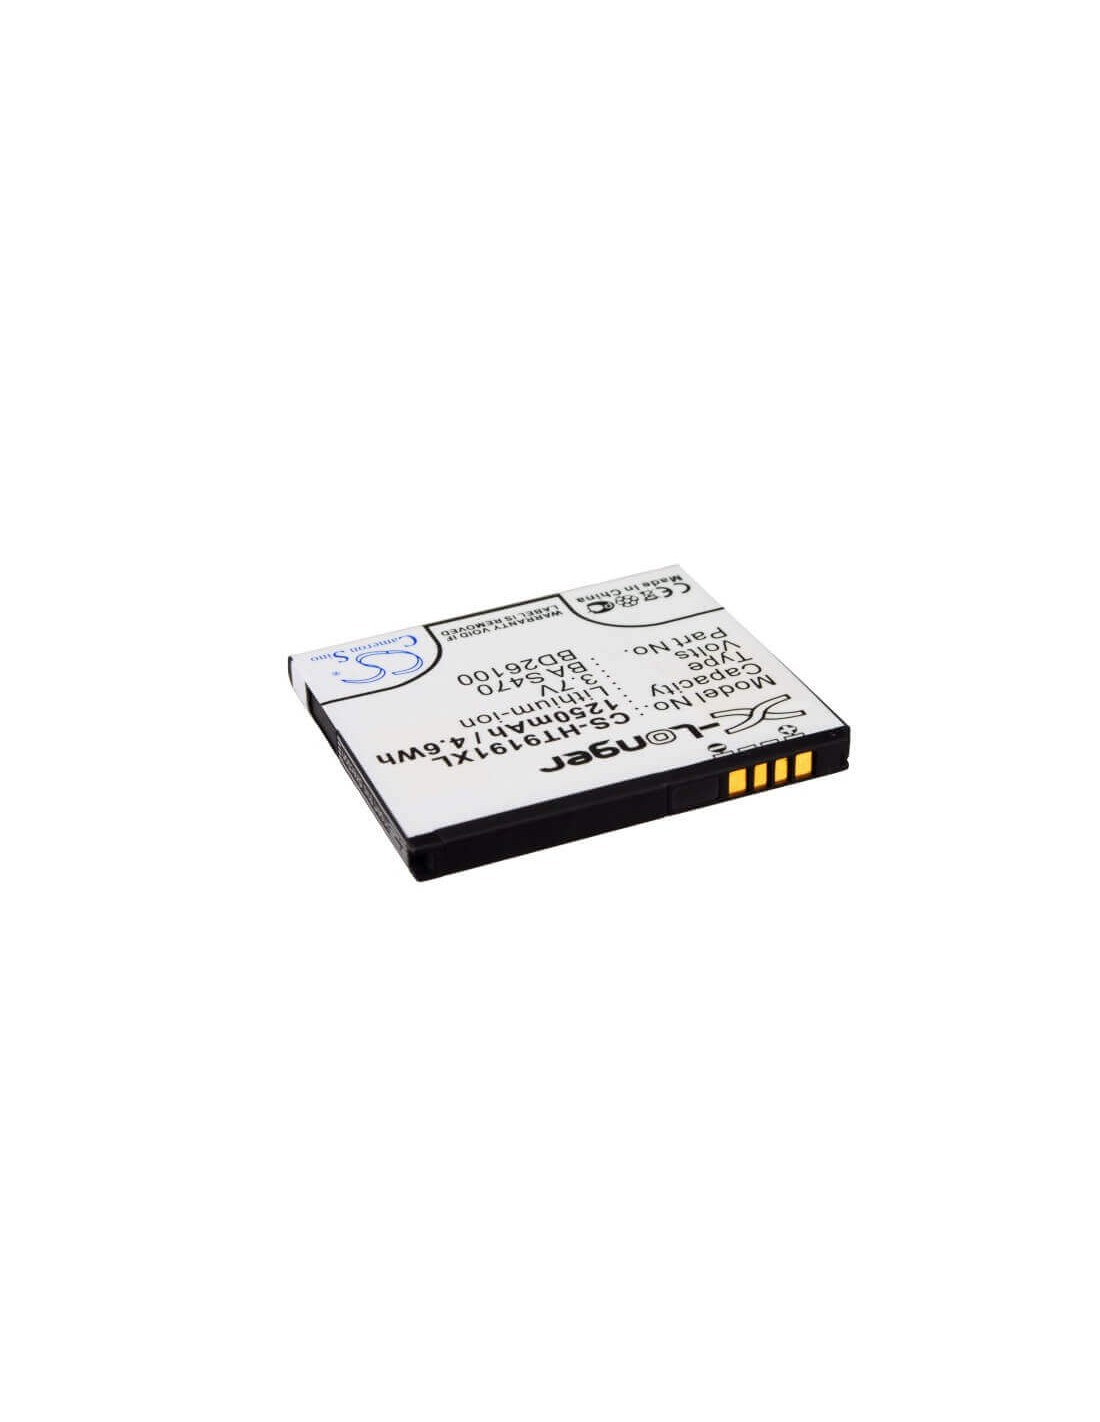 Battery for HTC Ace, Desire HD, A9191 3.7V, 1250mAh - 4.63Wh